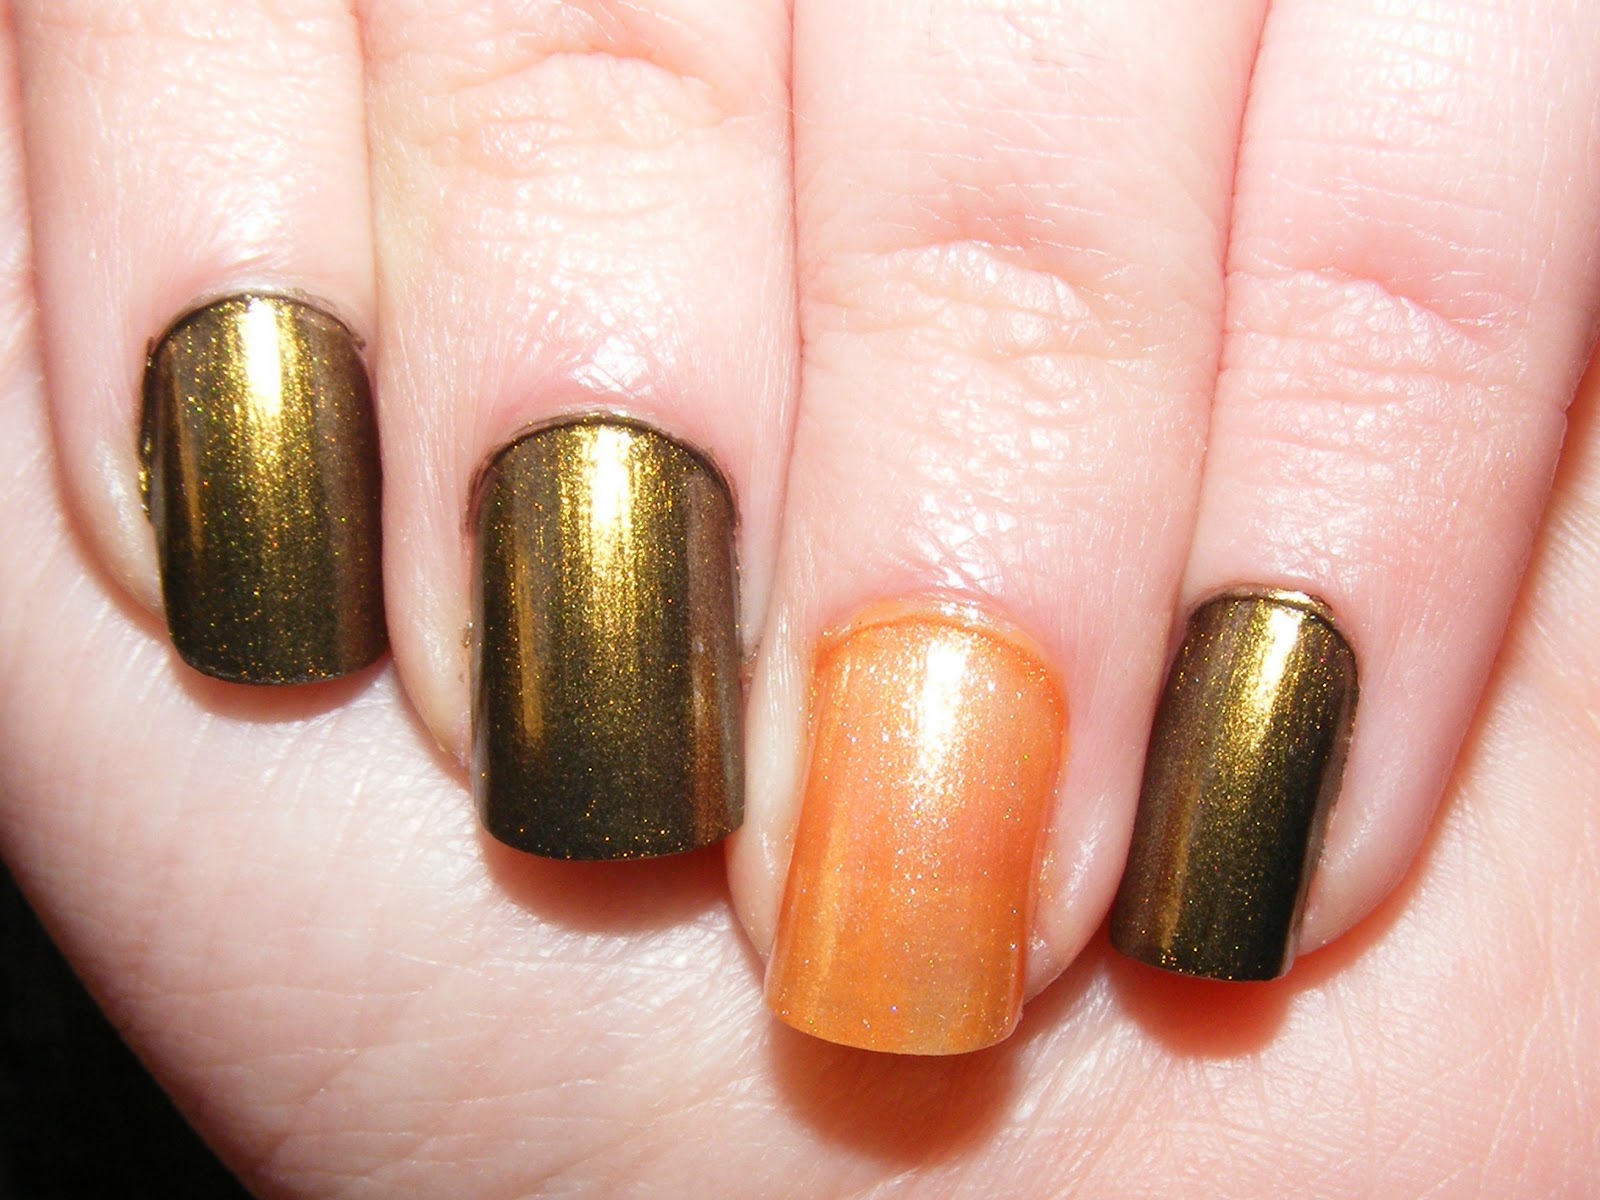 Nails Of The Day (NOTD): Egyptian gold